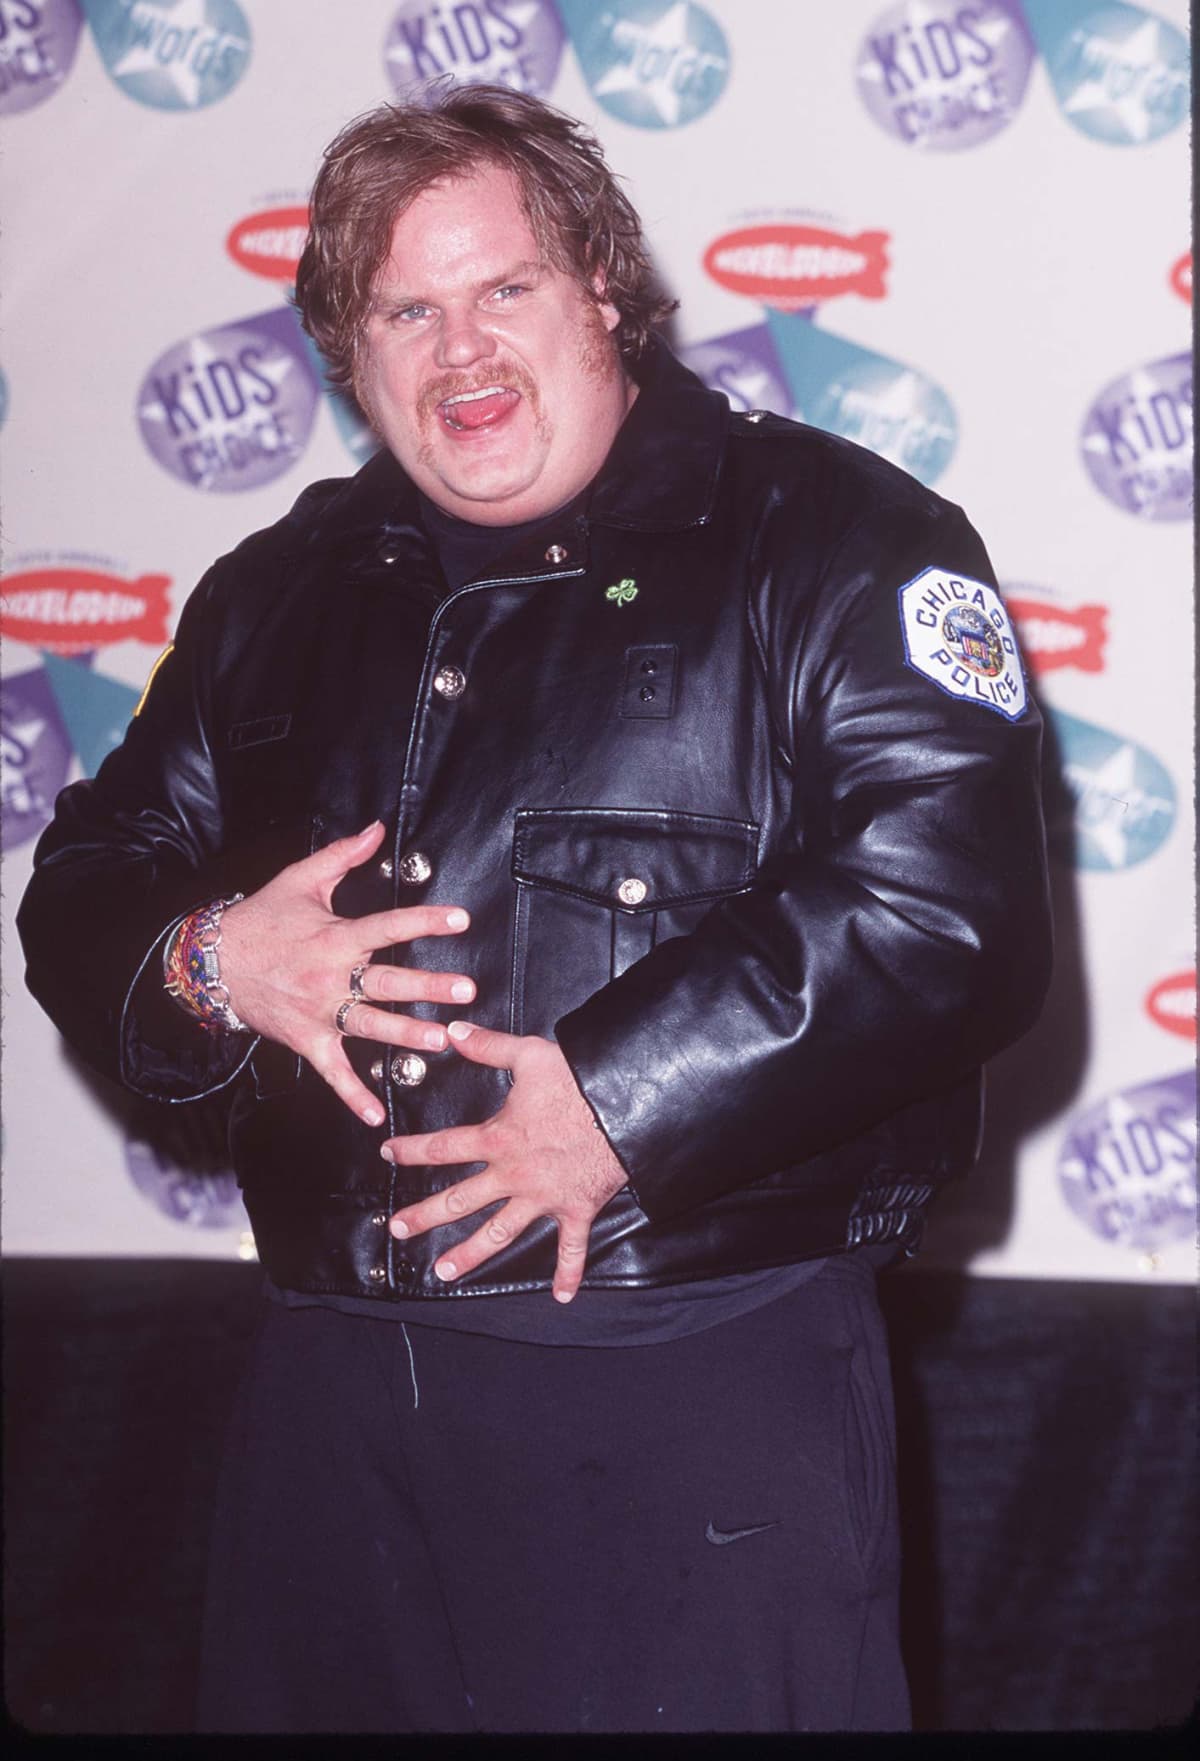 LOS ANGELES - APRIL 19:  Actor Chris Farley attends 10th Annual Nickelodeon Kid's Choice Awards on April 19, 1997 at the Olympic Auditorium in Los Angeles, California. (Photo by Ron Galella, Ltd./Ron Galella Collection via Getty Images) 